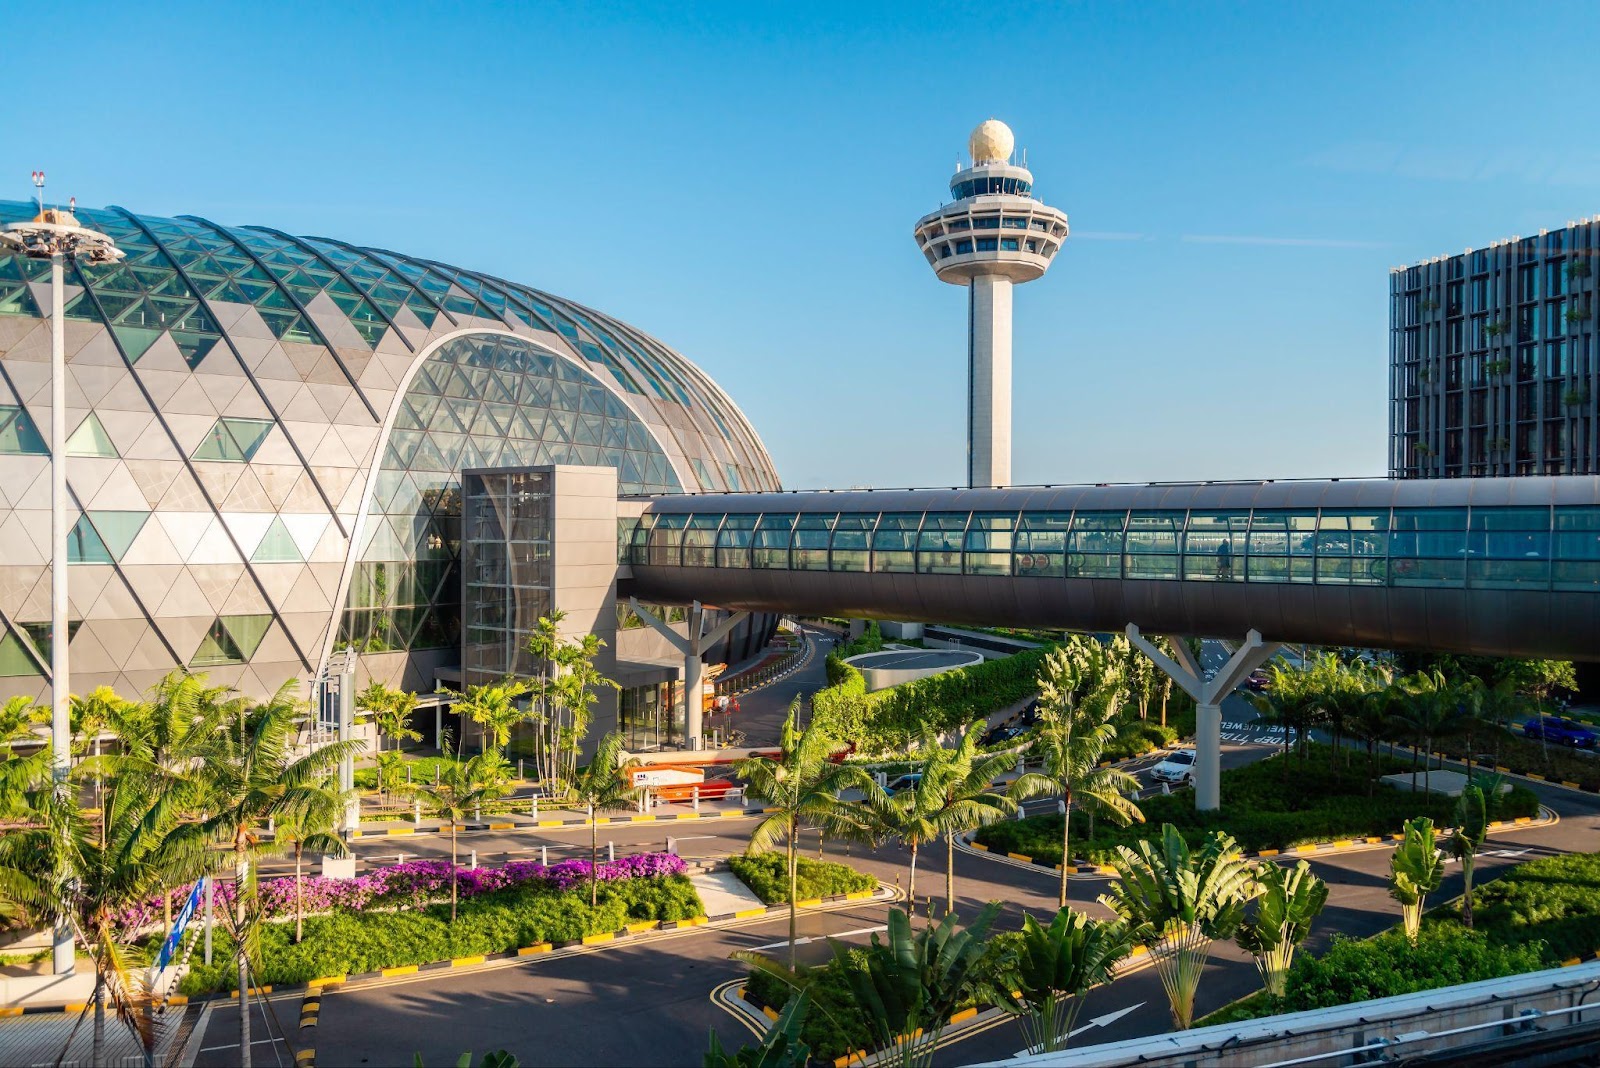 Singapore Changi Airport as a Gateway to Possibilities